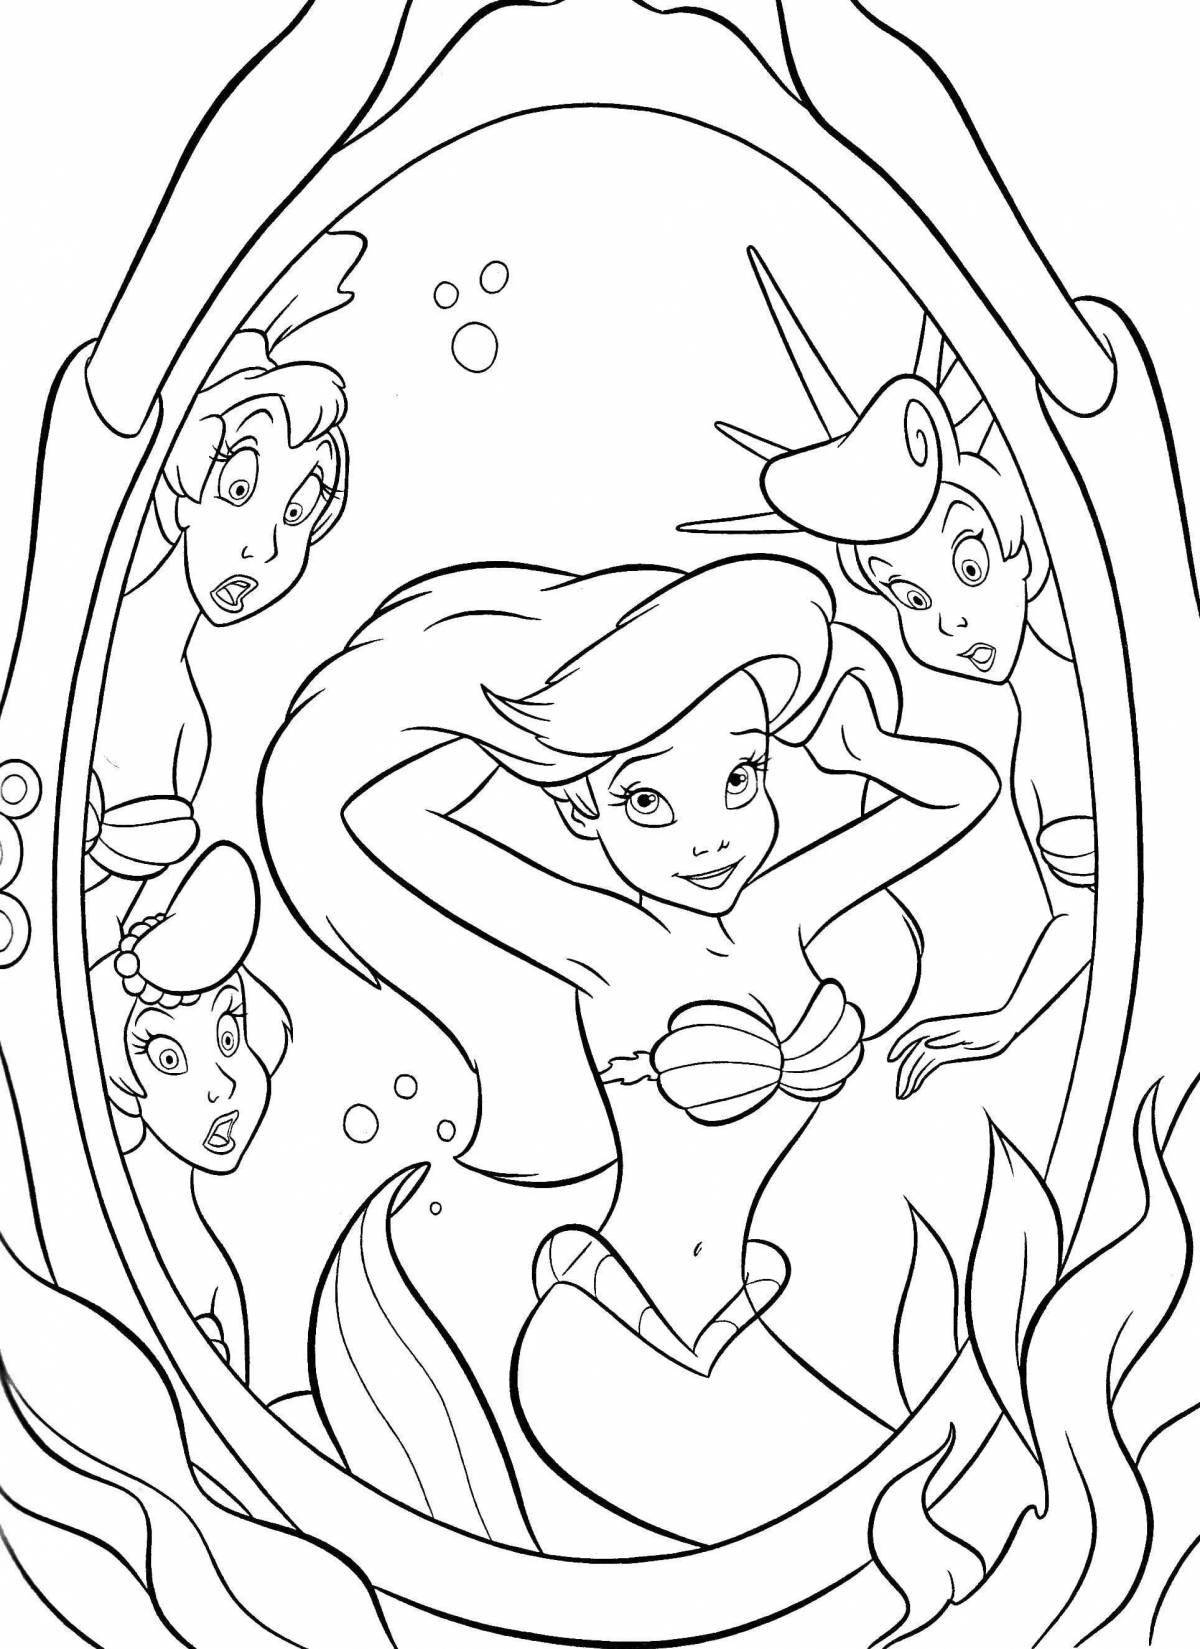 Majestic ariel the little mermaid coloring book for girls